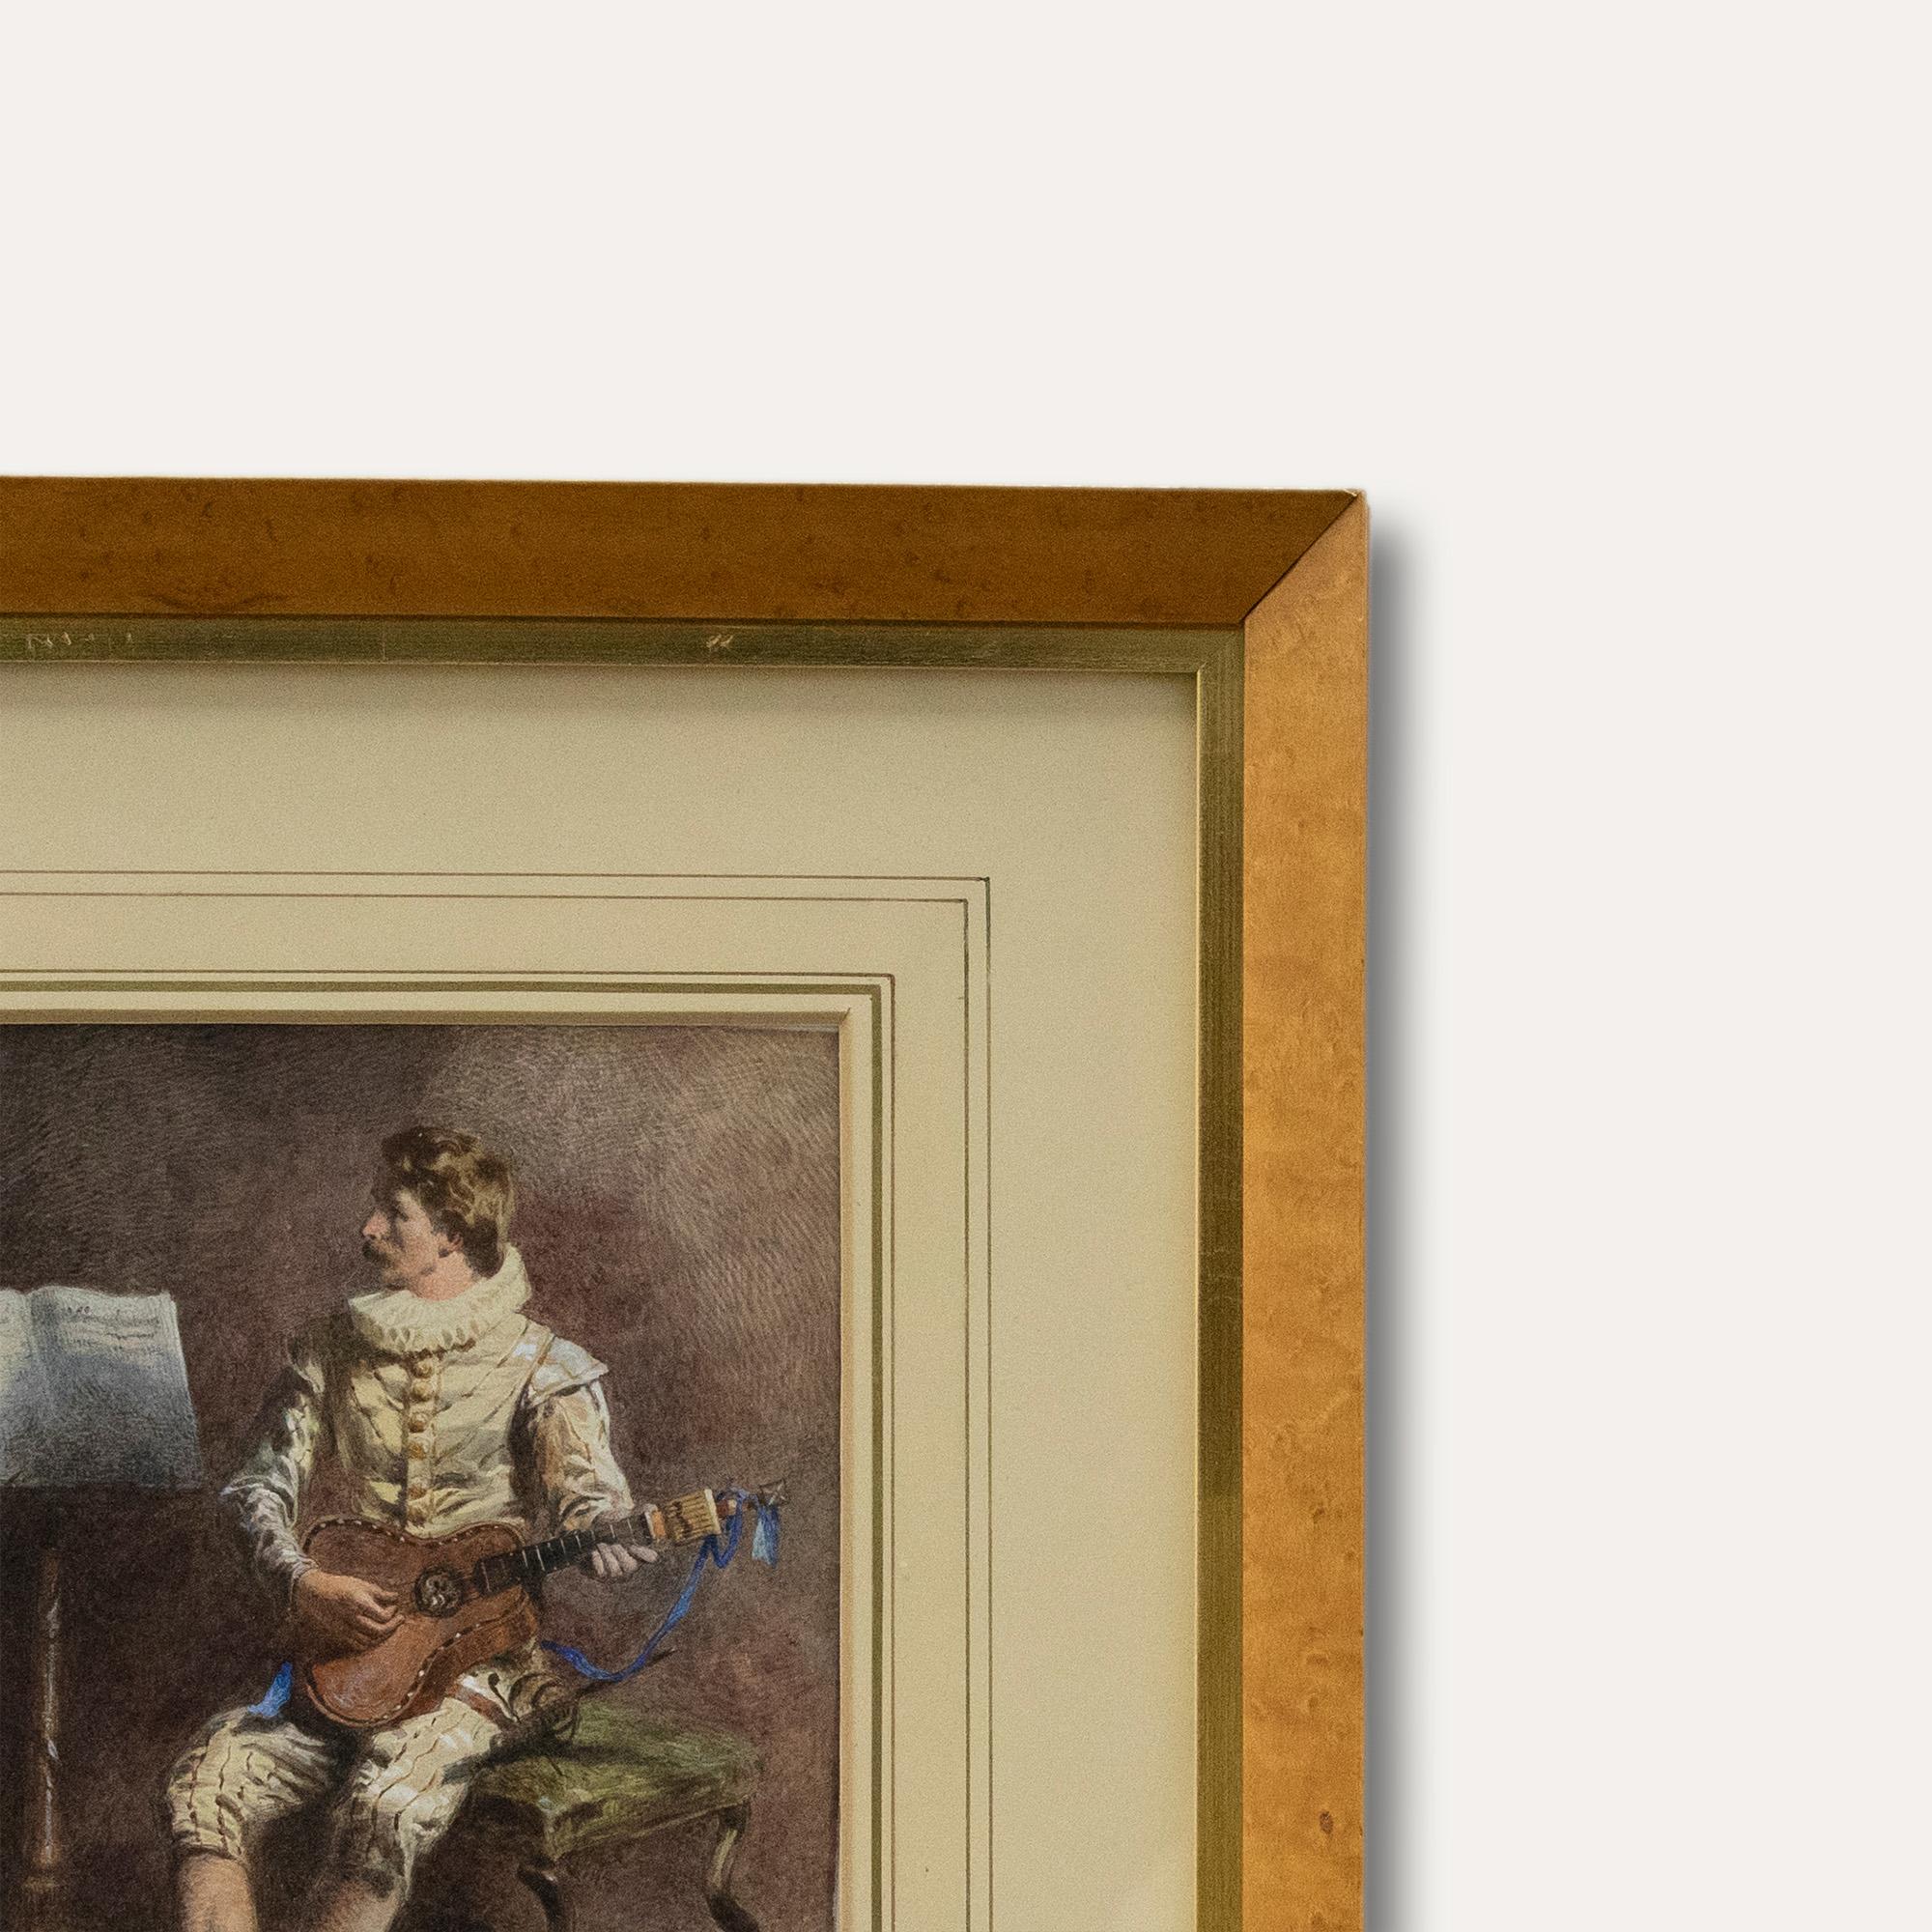 A fine 19th century watercolour depicting a musician playing the guitar. The male figure sits on a beautiful carved stool, reading music from a wooden stand to his right. Unsigned. The watercolour has been well-presented in an elegant bird's eye